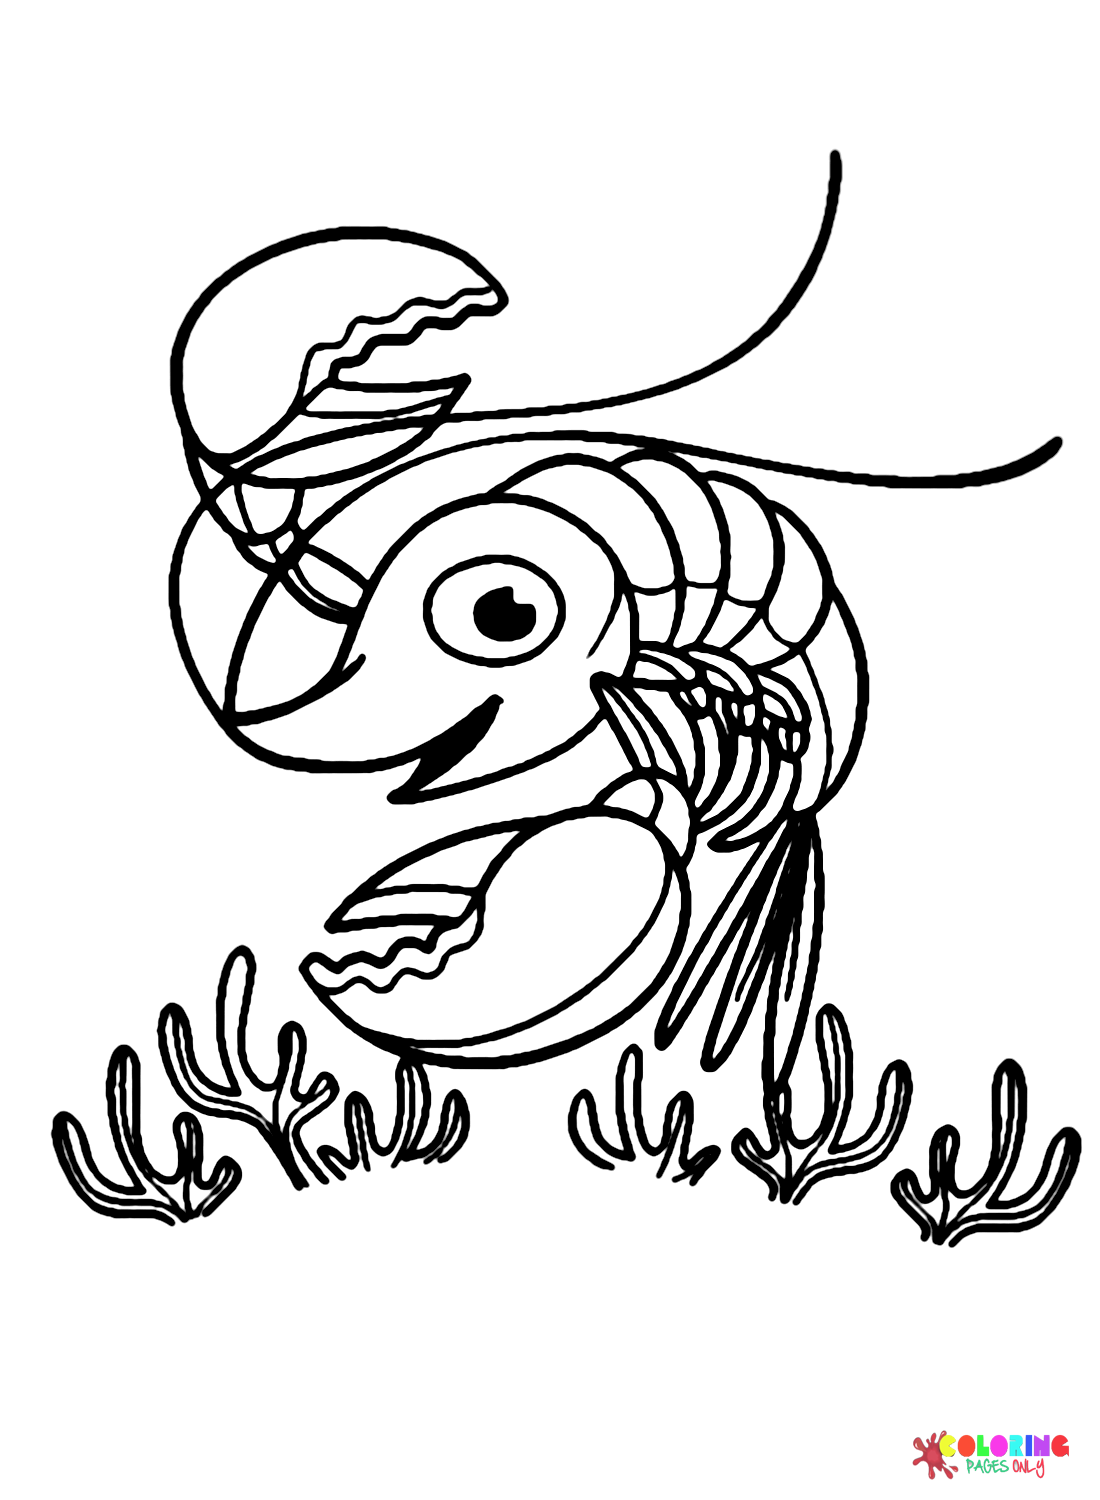 Tiny Shrimp Coloring Page